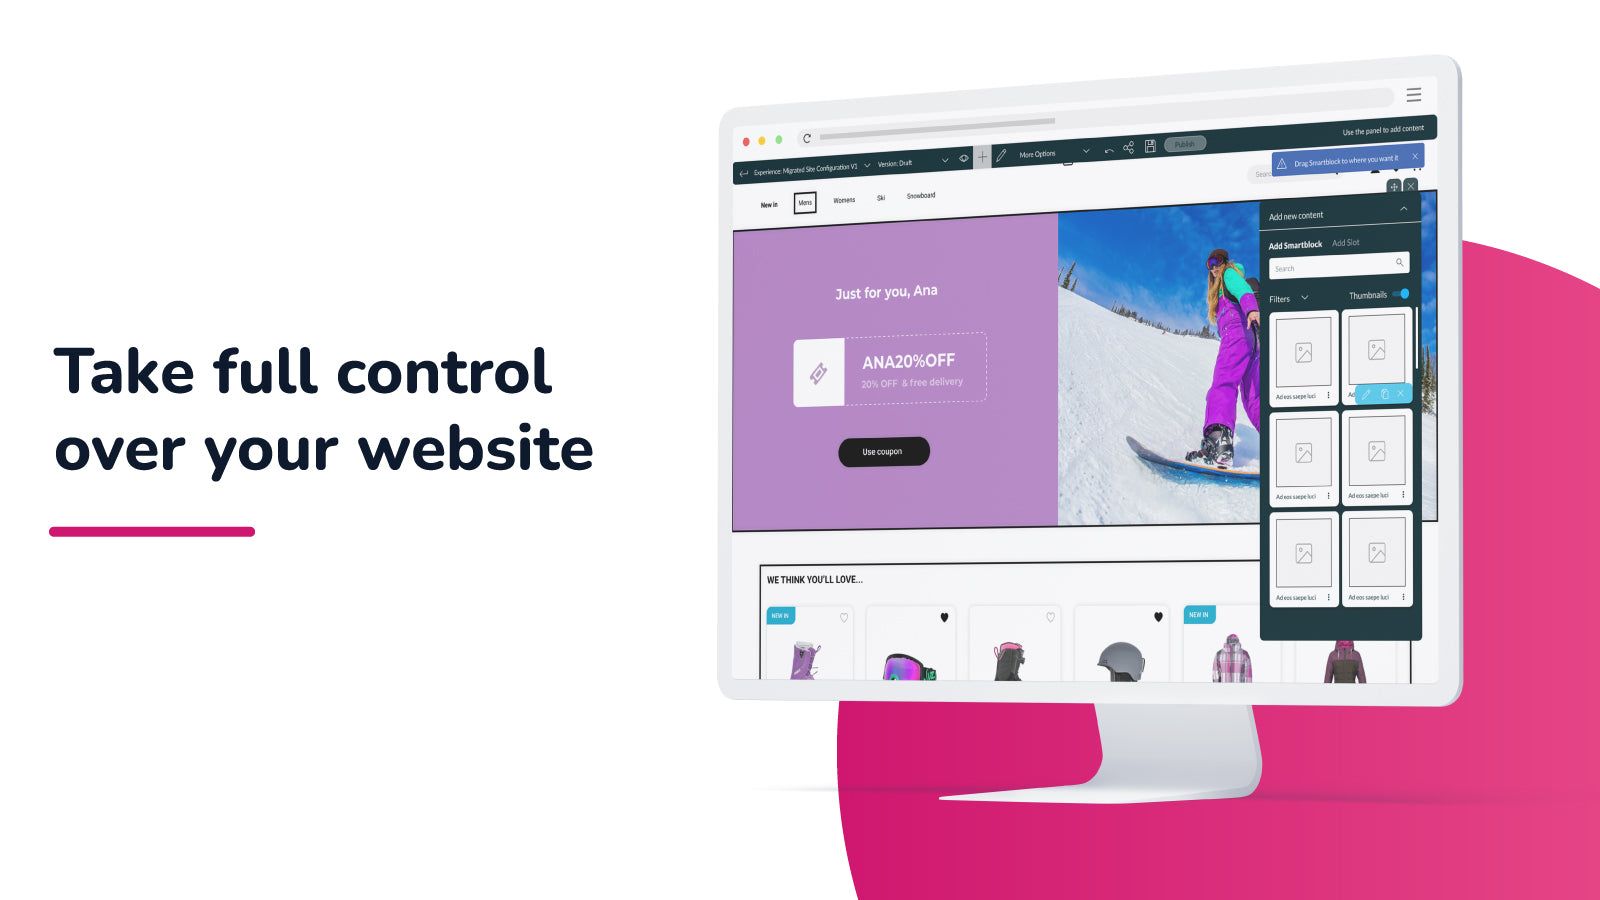 Take full control over your website